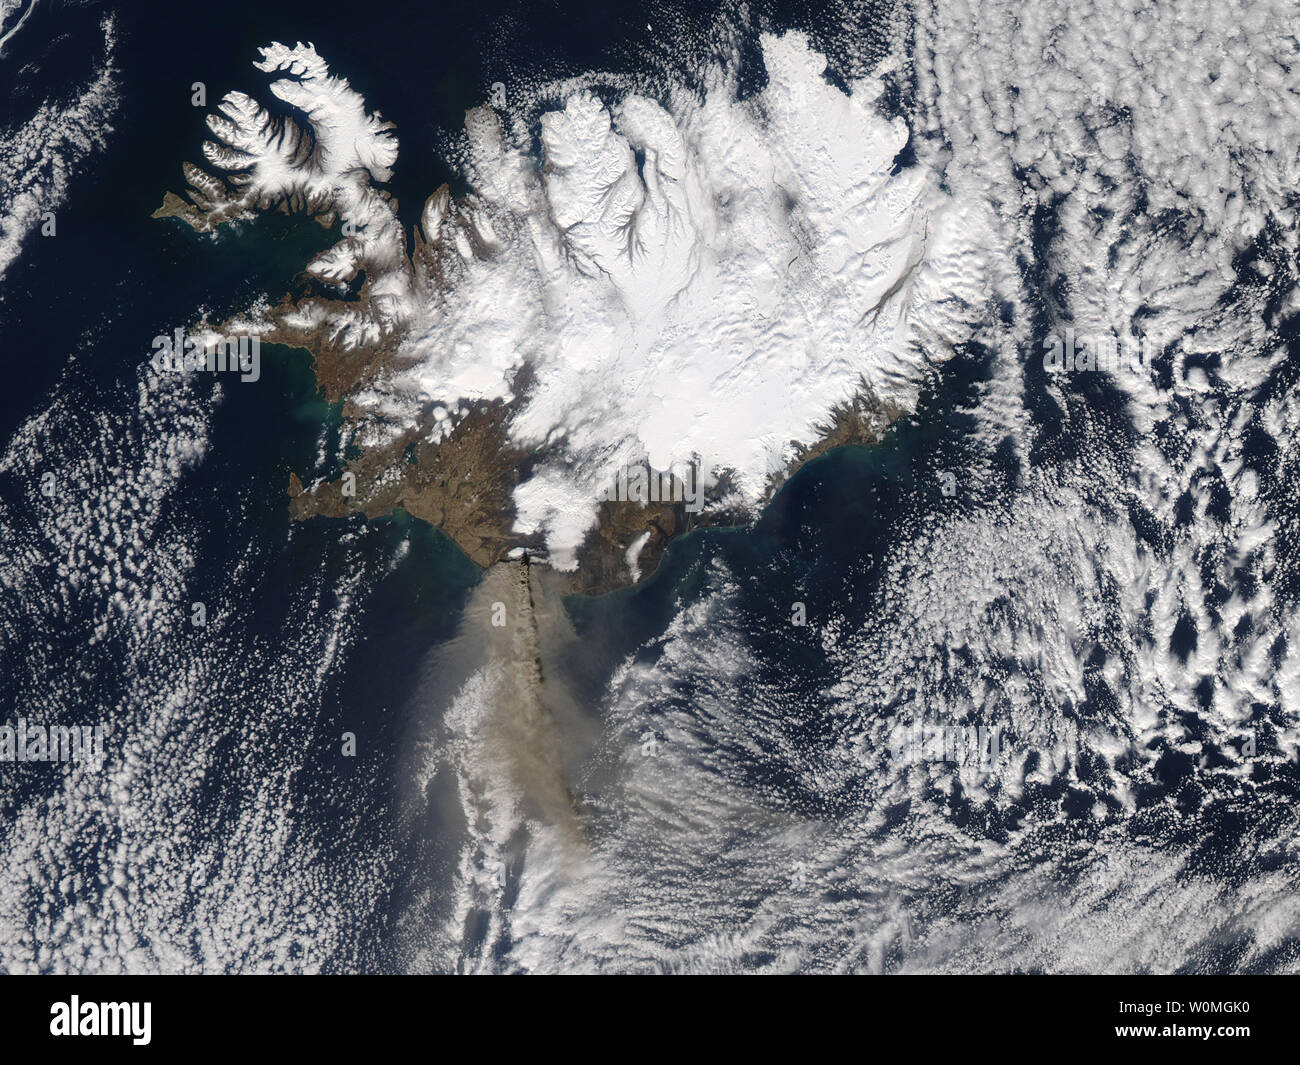 Thick ash poured from Iceland Eyjafjallajškull volcano when the Moderate Resolution Imaging Spectroradiometer (MODIS) on NASA's Aqua satellite acquired this image on April 17, 2010. The ash in this image is at two different altitudes. A concentrated plume rises over a more diffuse cloud of ash, casting a dark shadow on the ash below. The volcano had been emitting ash in puffs that reached between 16,000 and 24,000 feet, according to the Icelandic Met Office. The higher plume seen here is likely from a more explosive event.     UPI/NASA Stock Photo